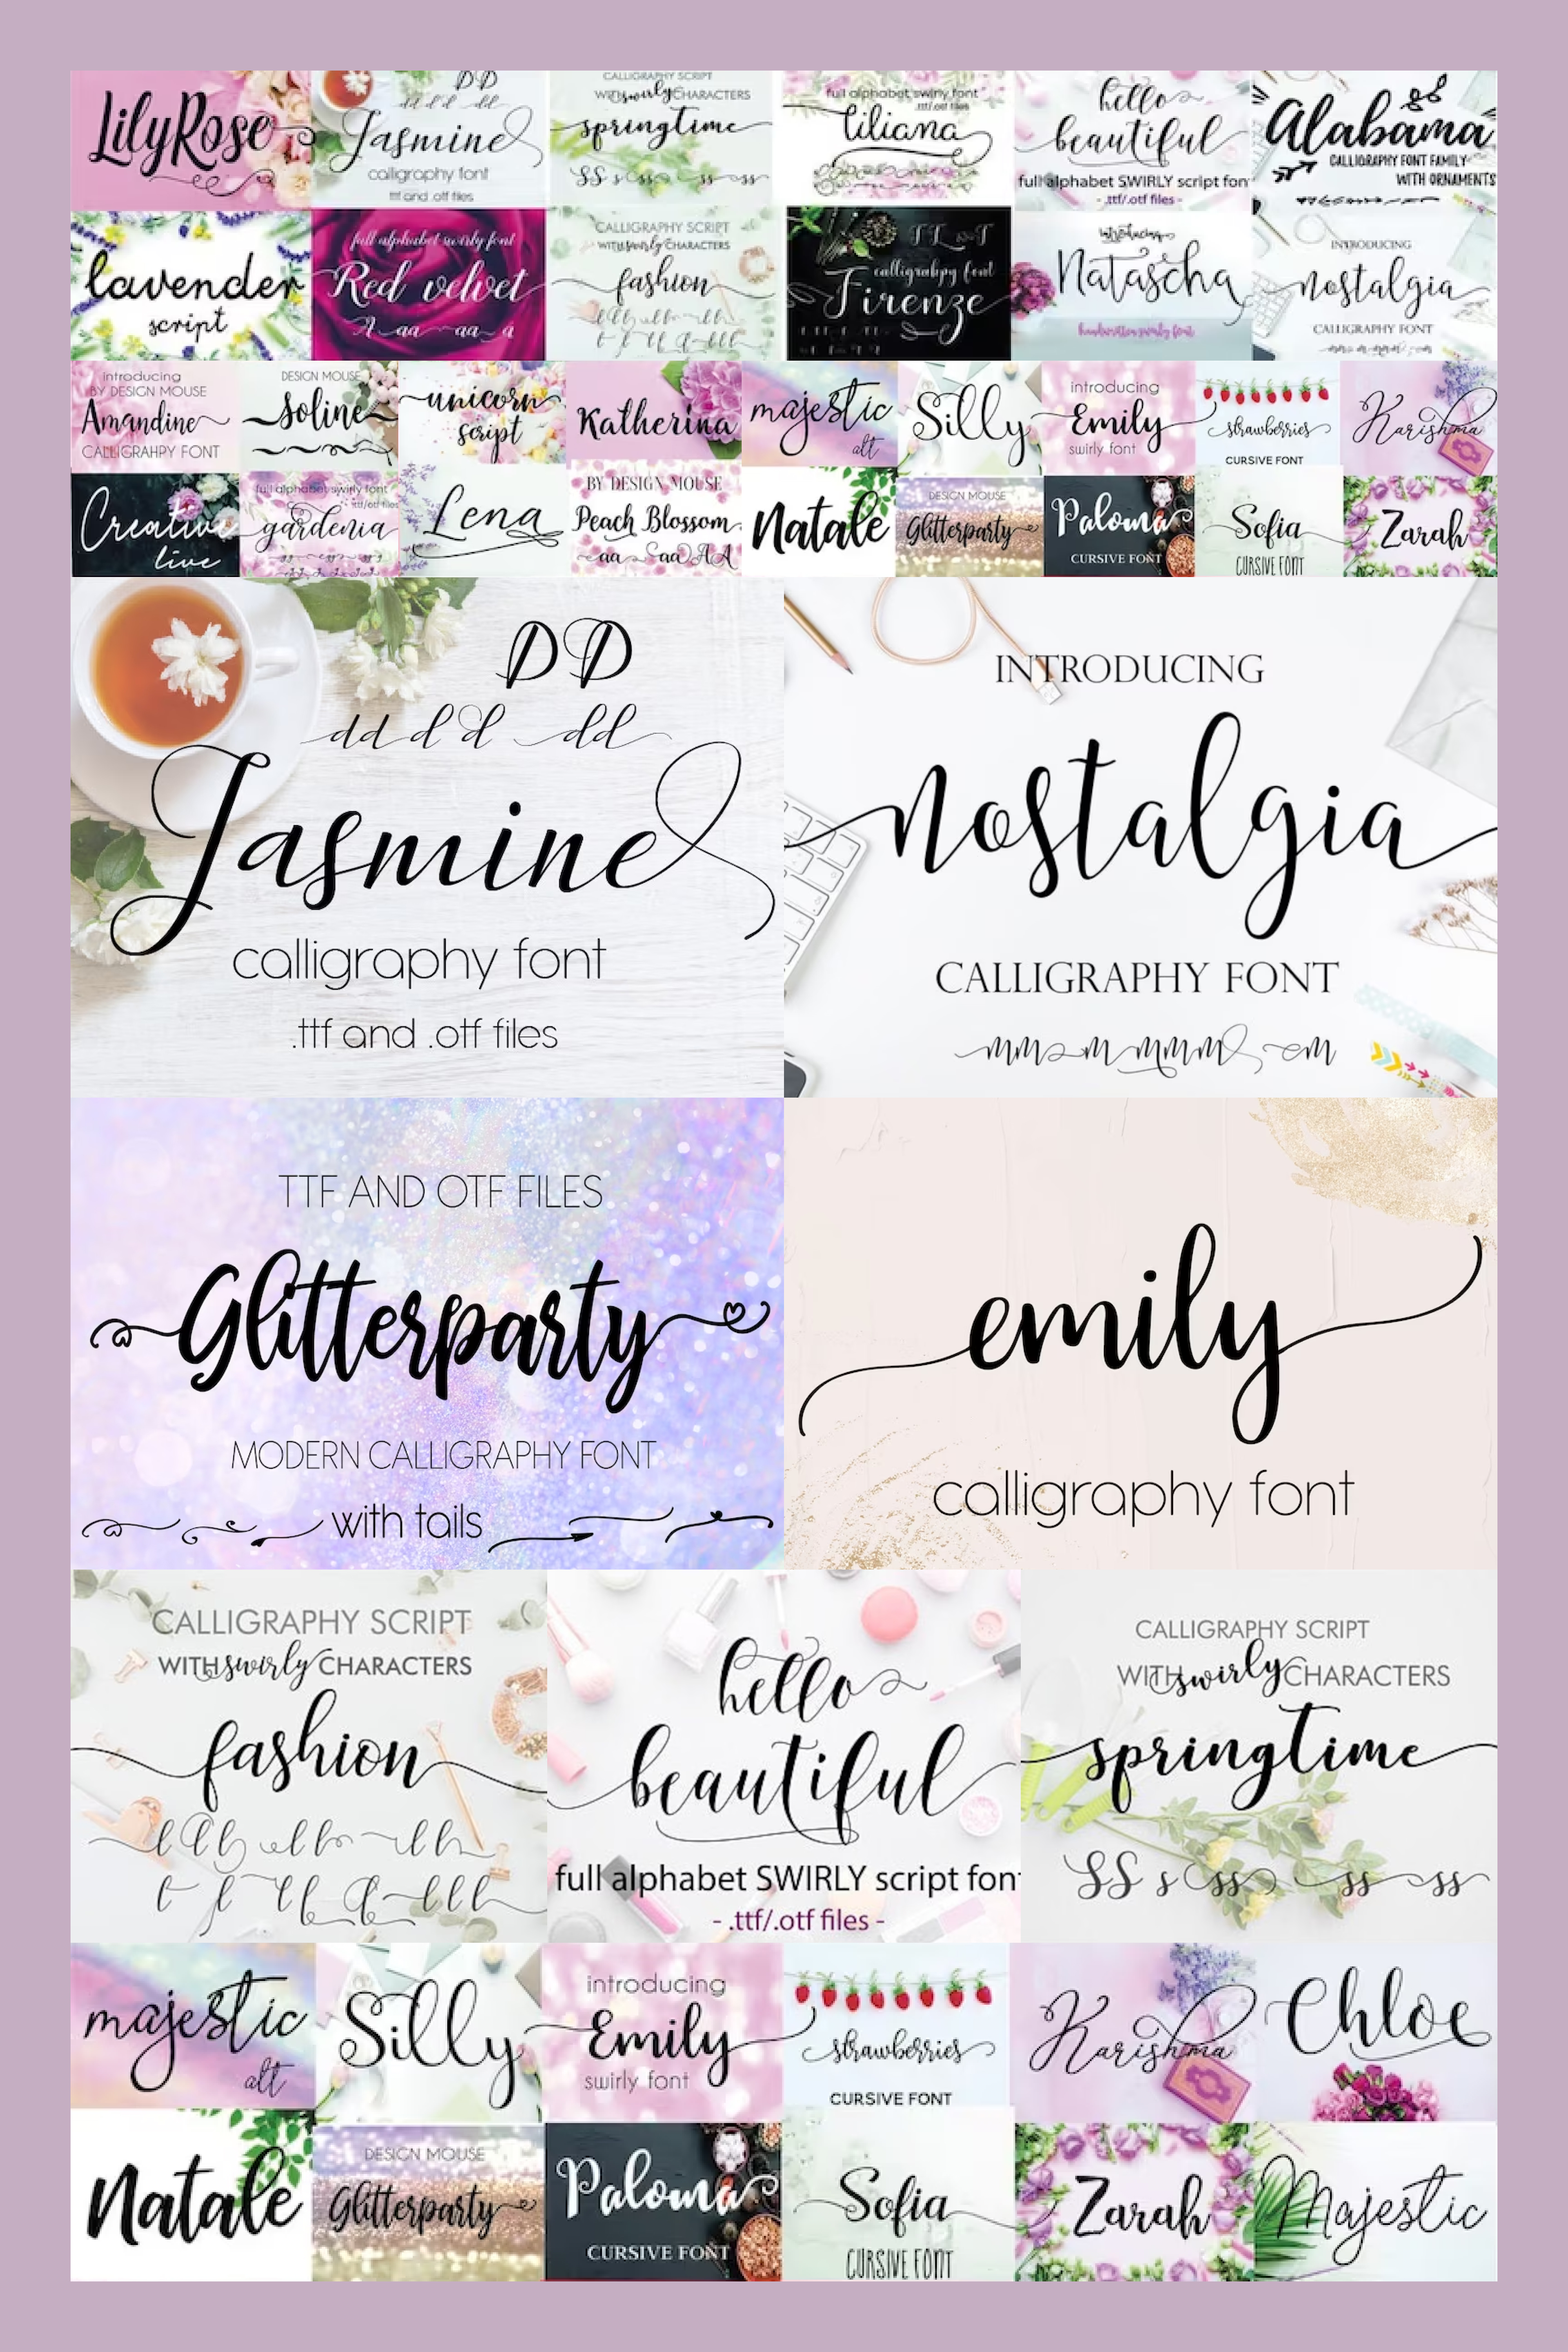 Collage of examples of using different fonts.